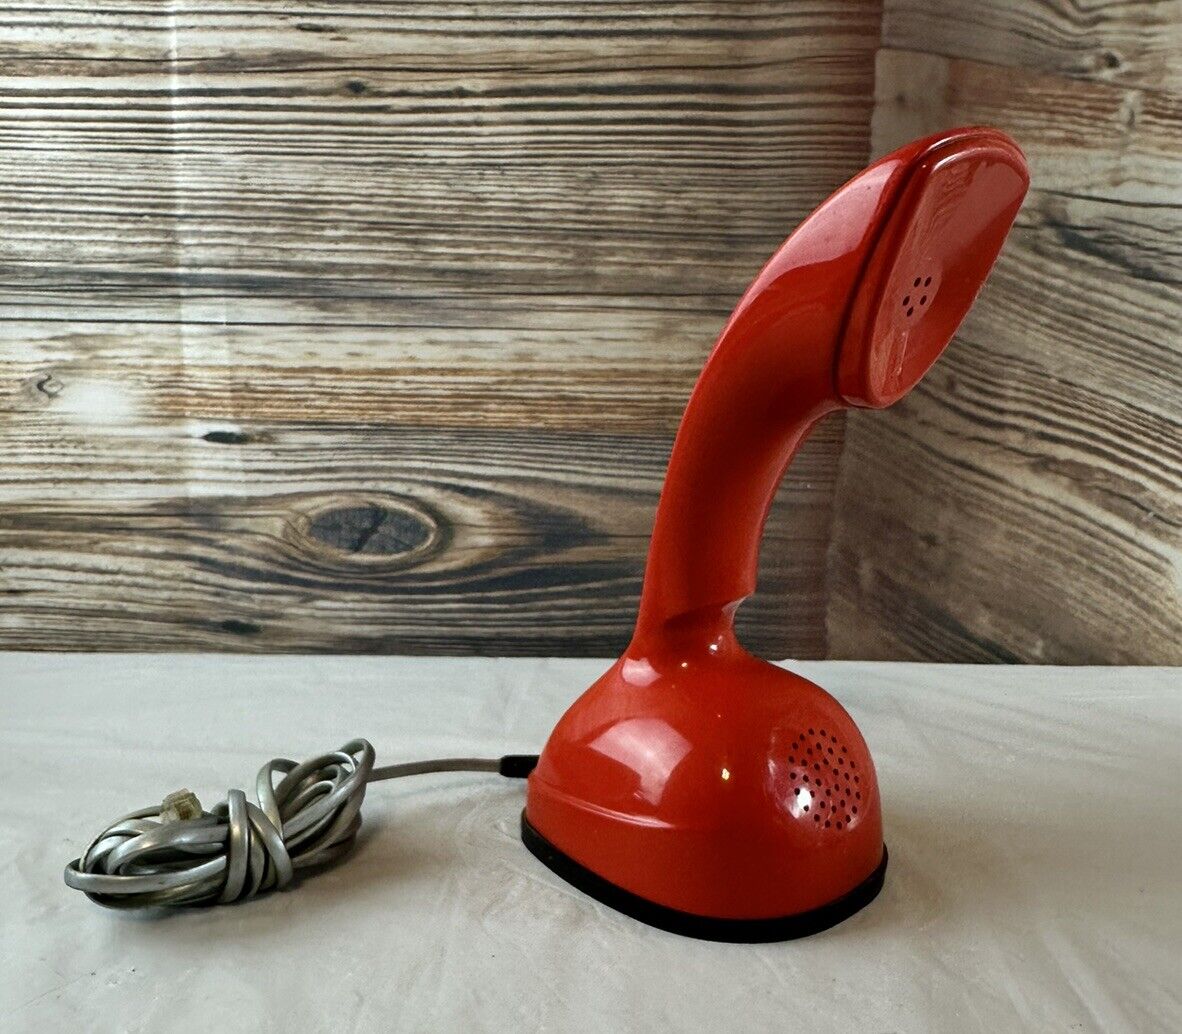 Vintage 1960s Ericofon North Electric Co. Red Telephone Rotary Desk Phone